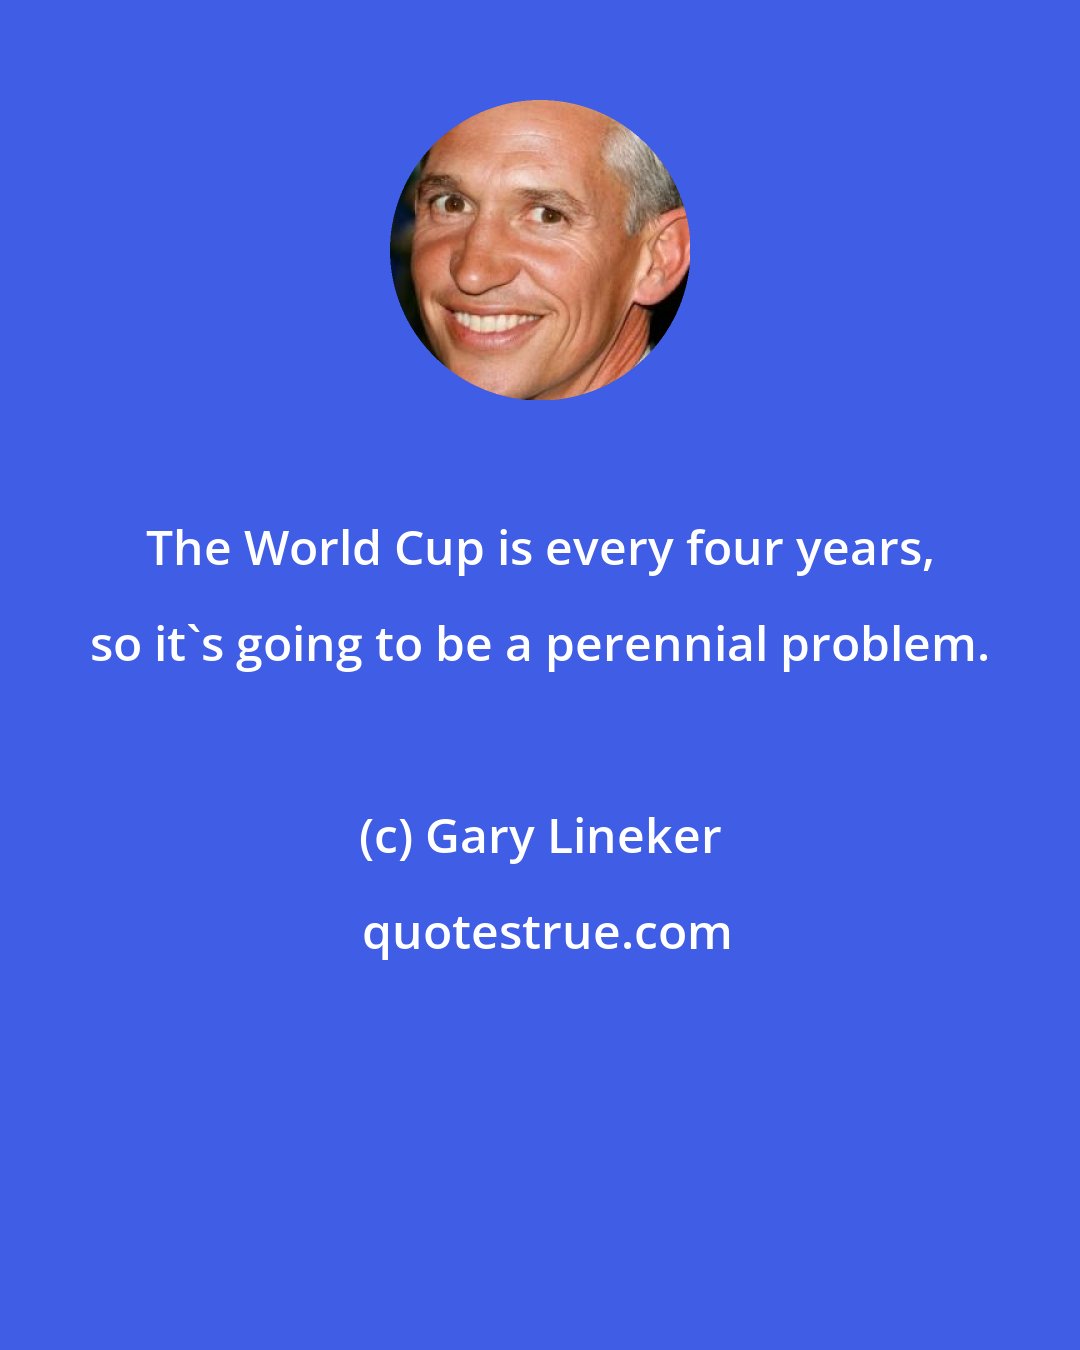 Gary Lineker: The World Cup is every four years, so it's going to be a perennial problem.